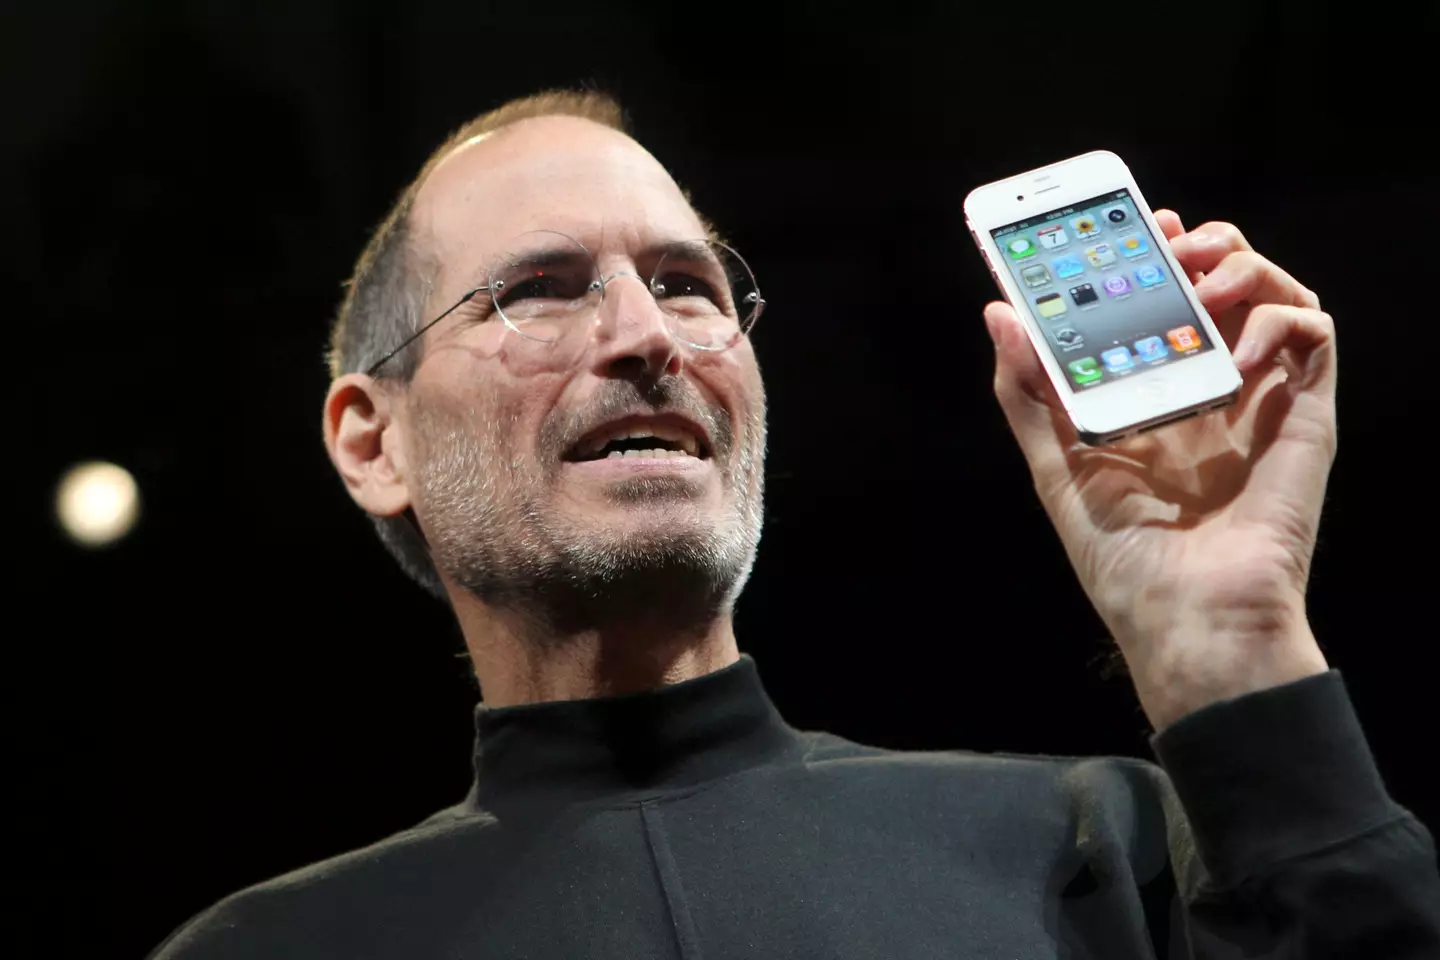 Steve Jobs said the 'i' doesn't have an official meaning.